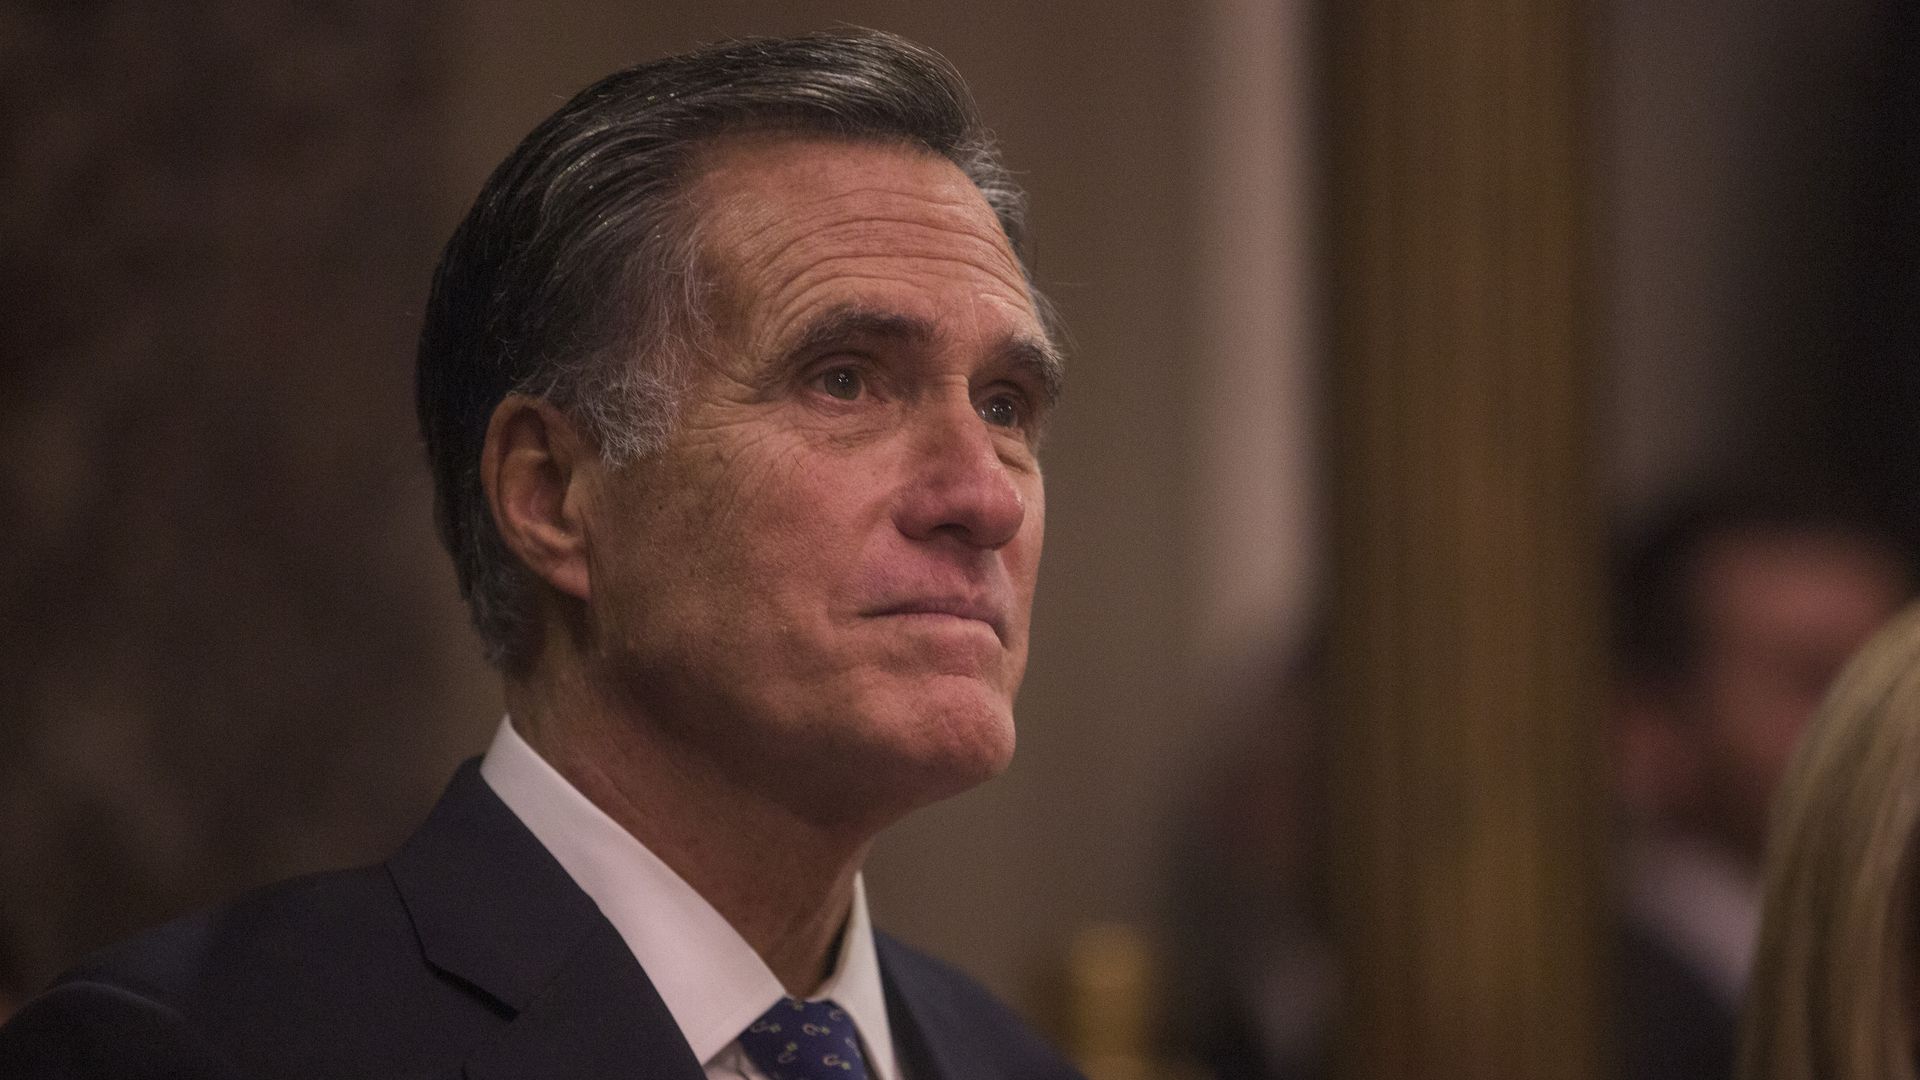 Mitt Romney is pictured standing in a suit at a swearing-in ceremony. 